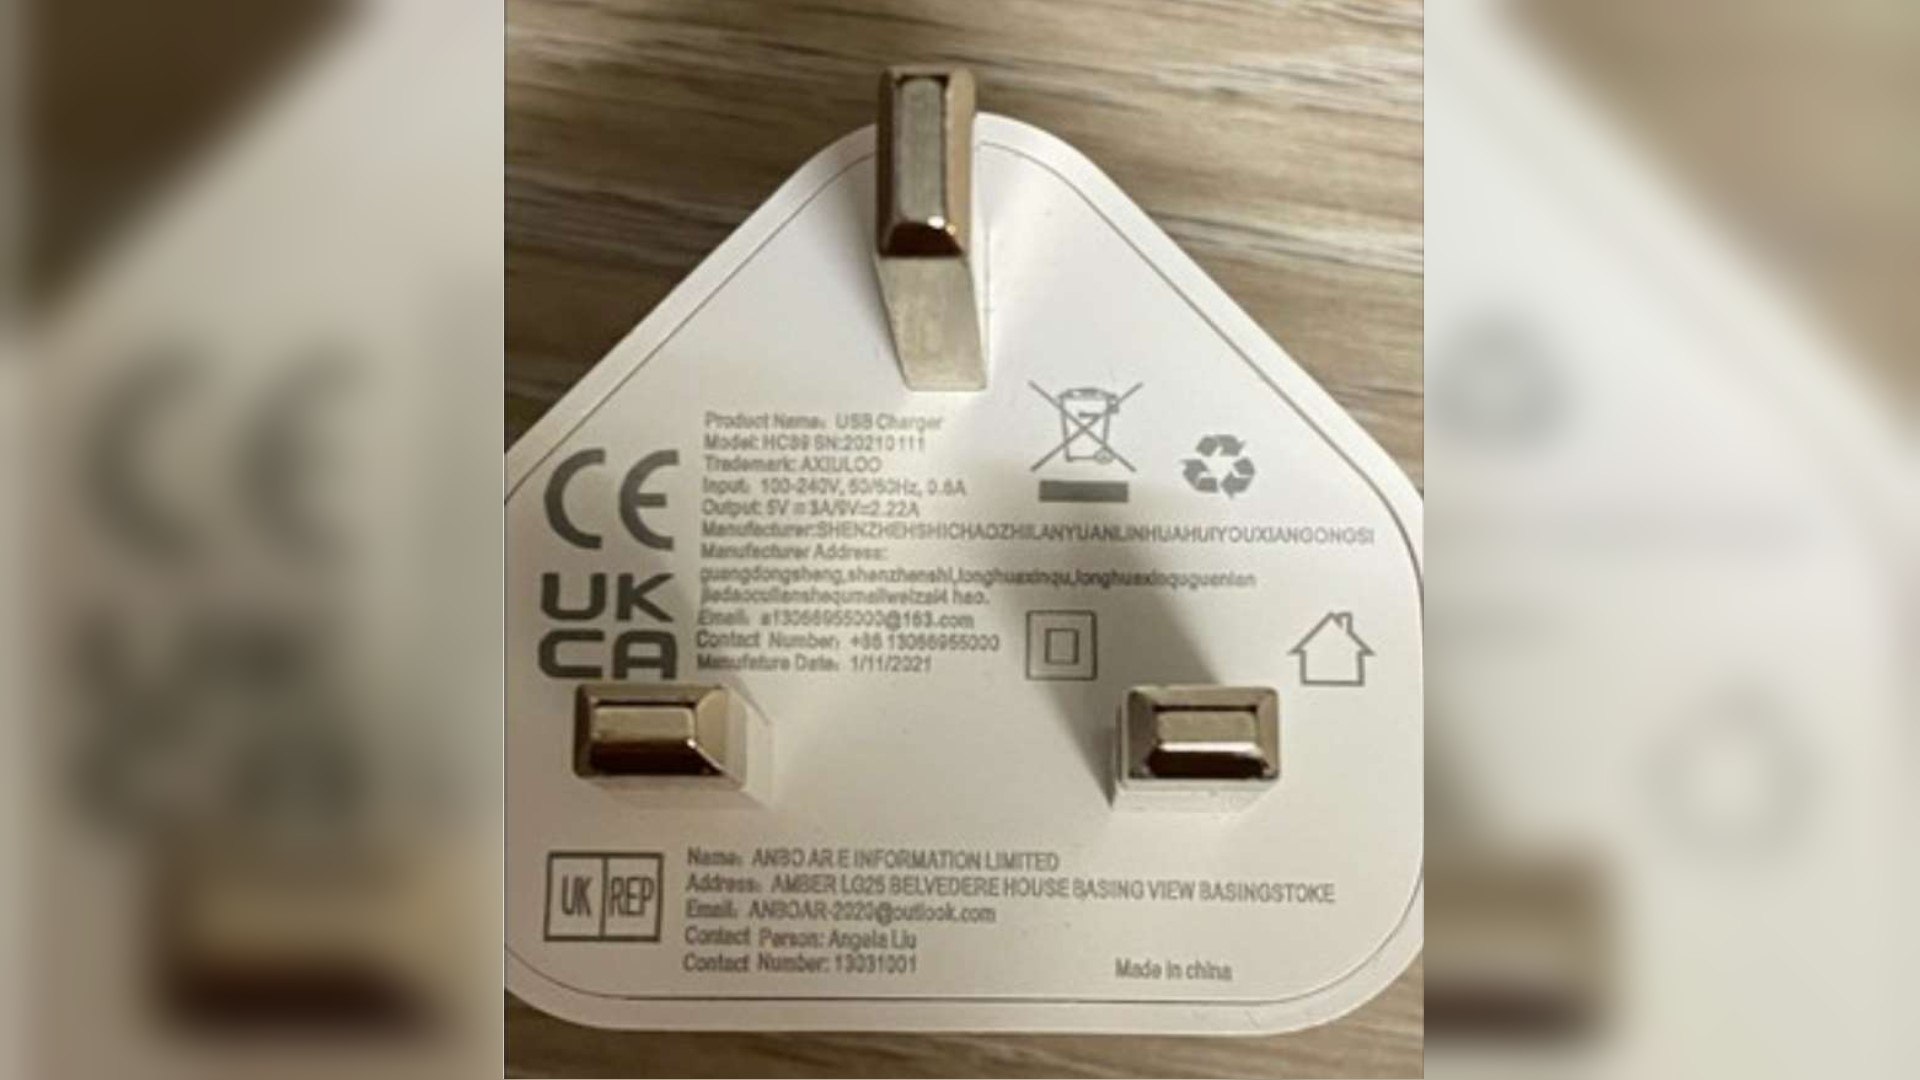 AXIULOO 20W USB C Fast Charger Plug for iPhone has been recalled after Trading Standards found it presented a serious risk.